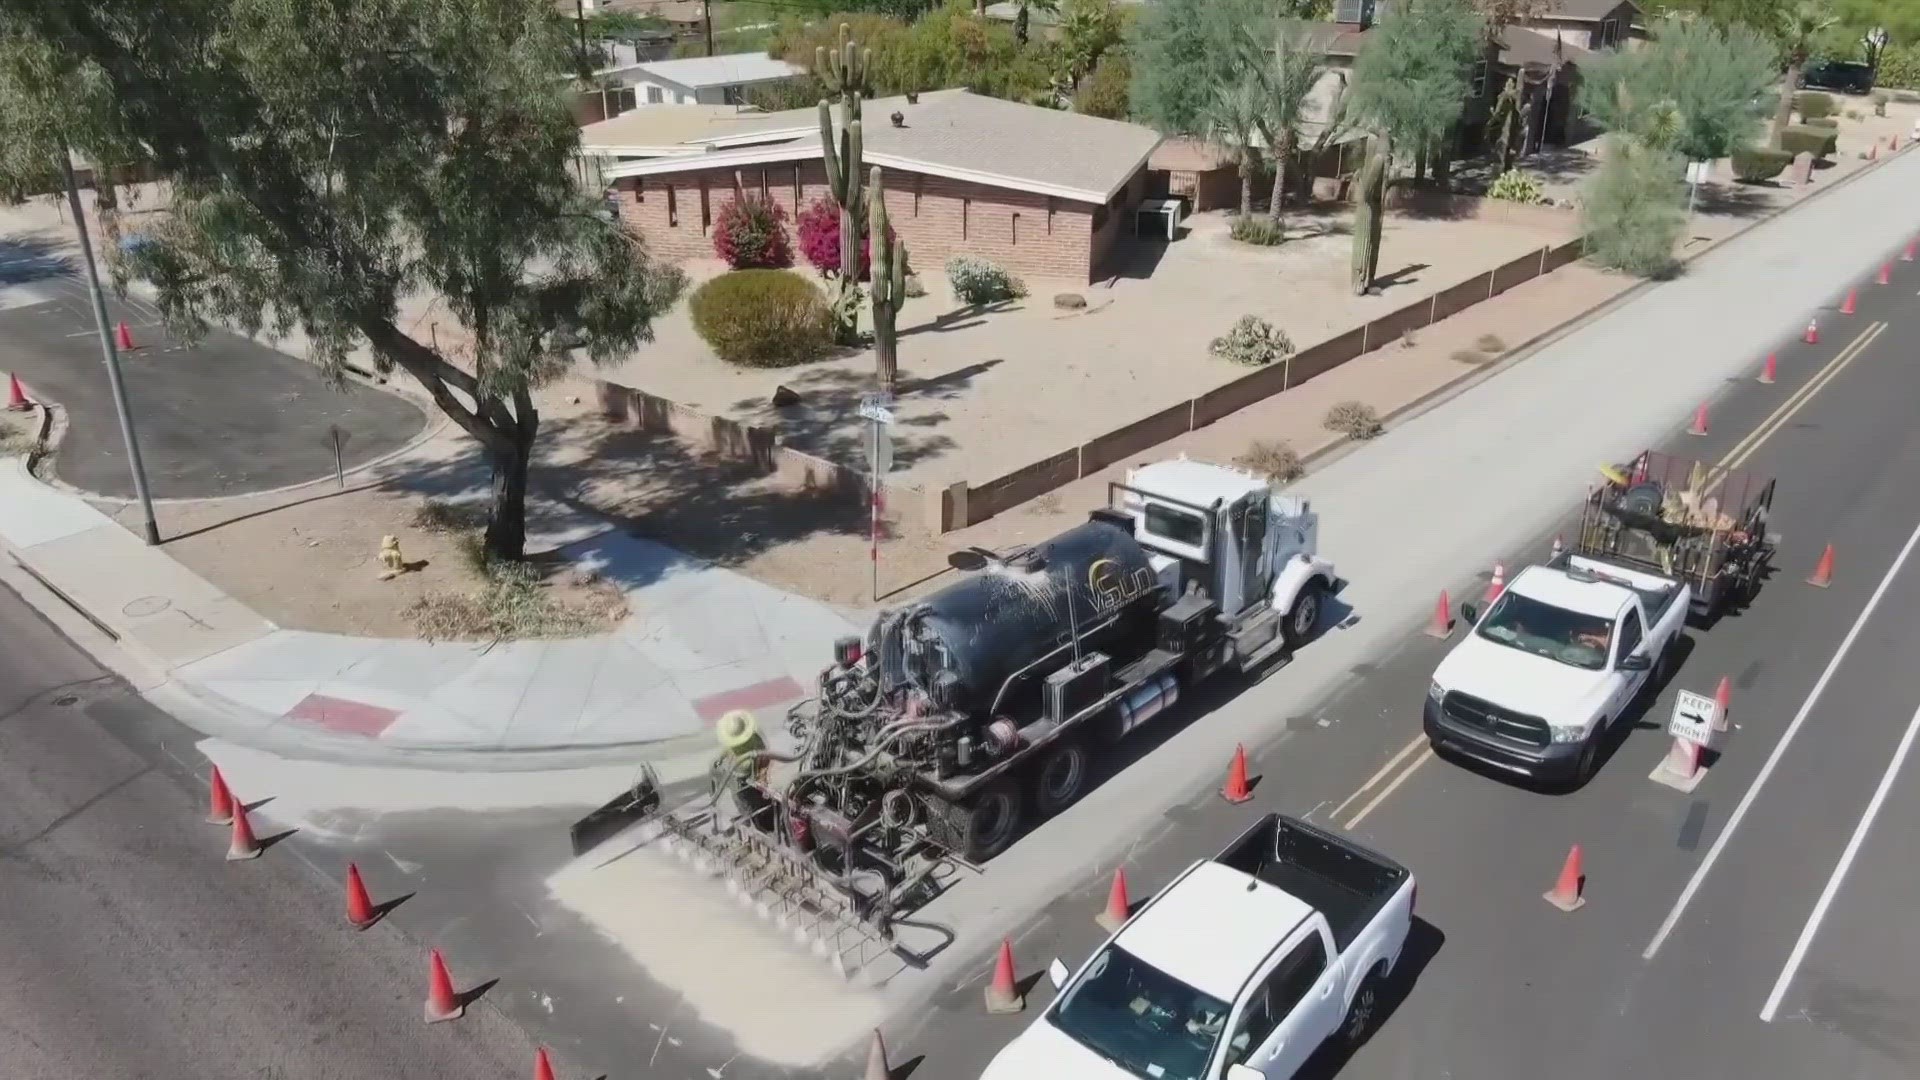 The city began testing cool pavements in 2020. Representatives say the roads with the treatment are 12-15 degrees cooler than regular asphalt.